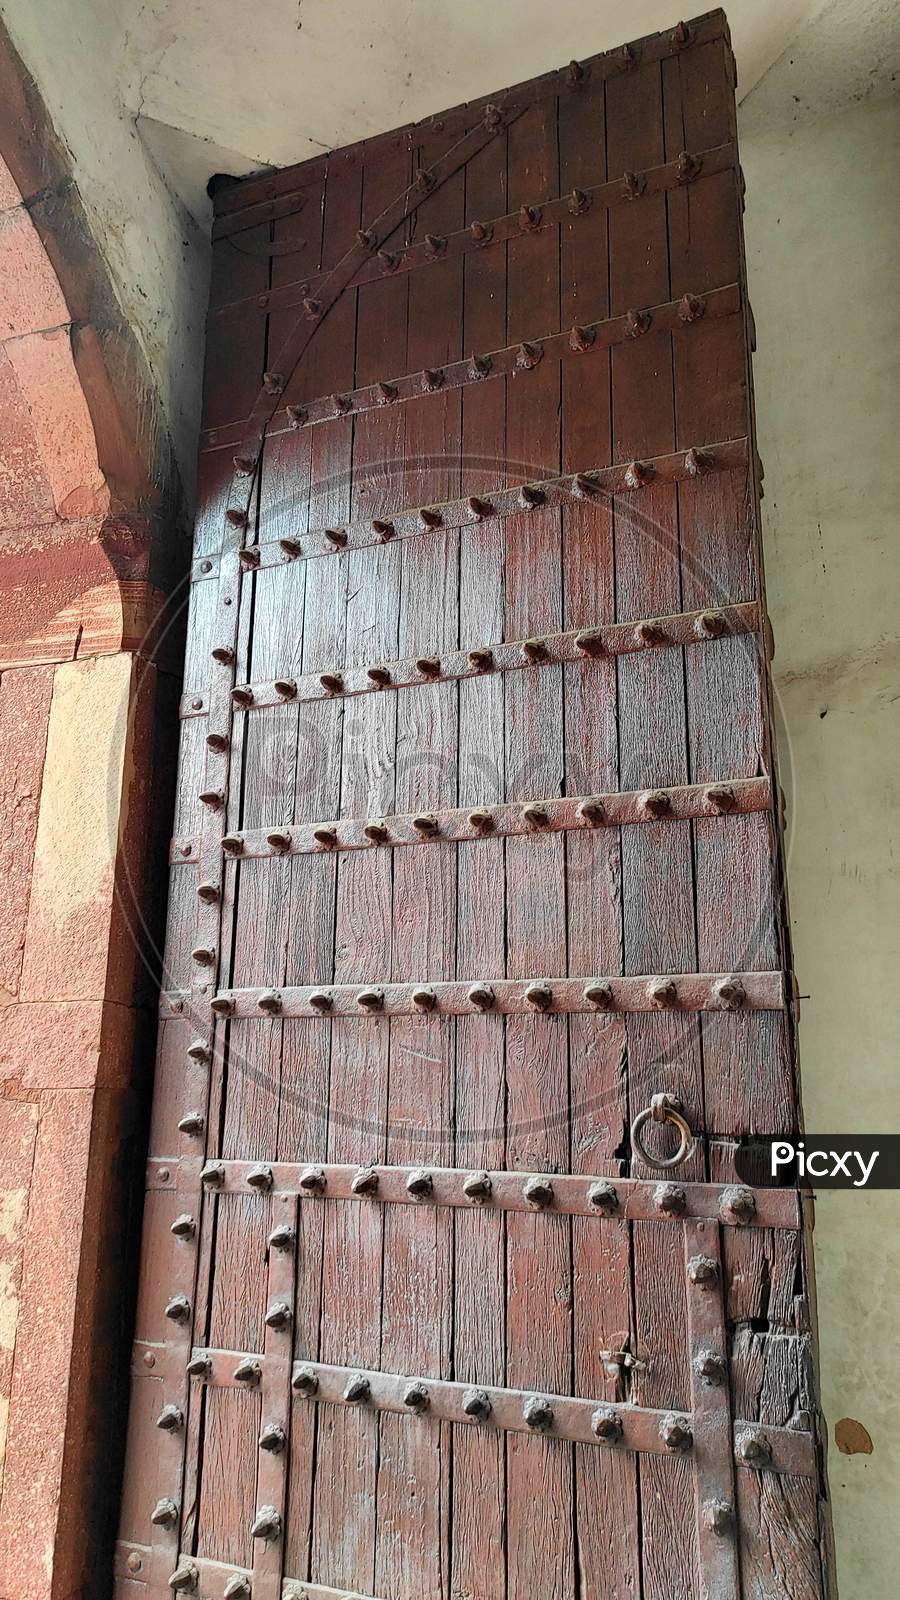 Wooden door, Ancient, Humayun Tomb, Persian architect, UNESCO World Heritage site, Mobile photography